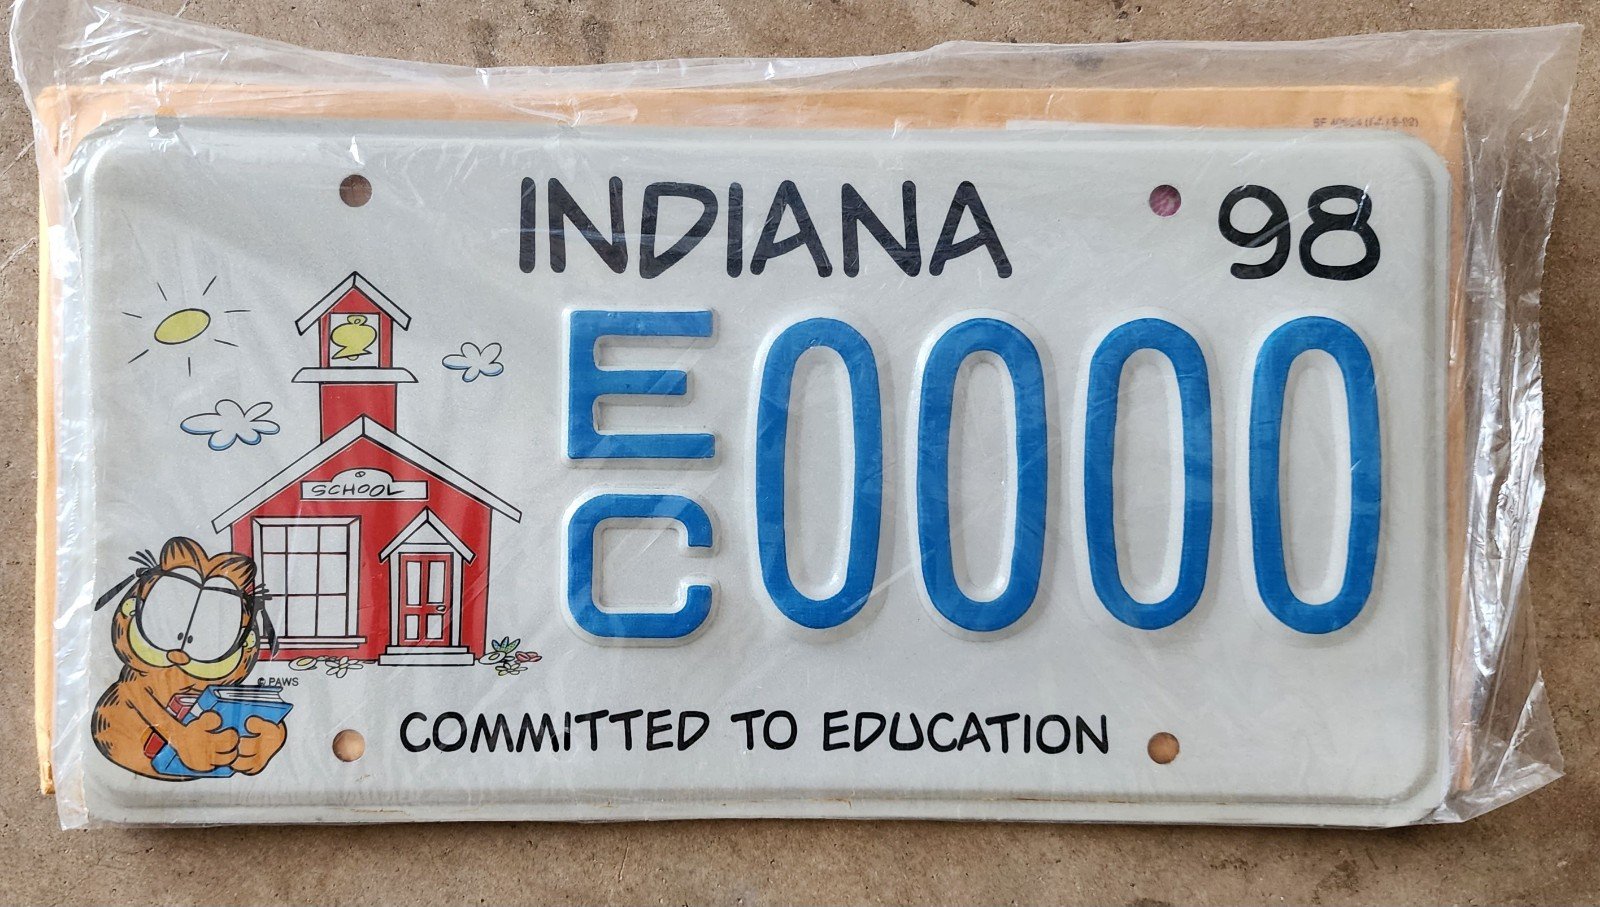 Indiana Committed To Education Sample License Plate - F